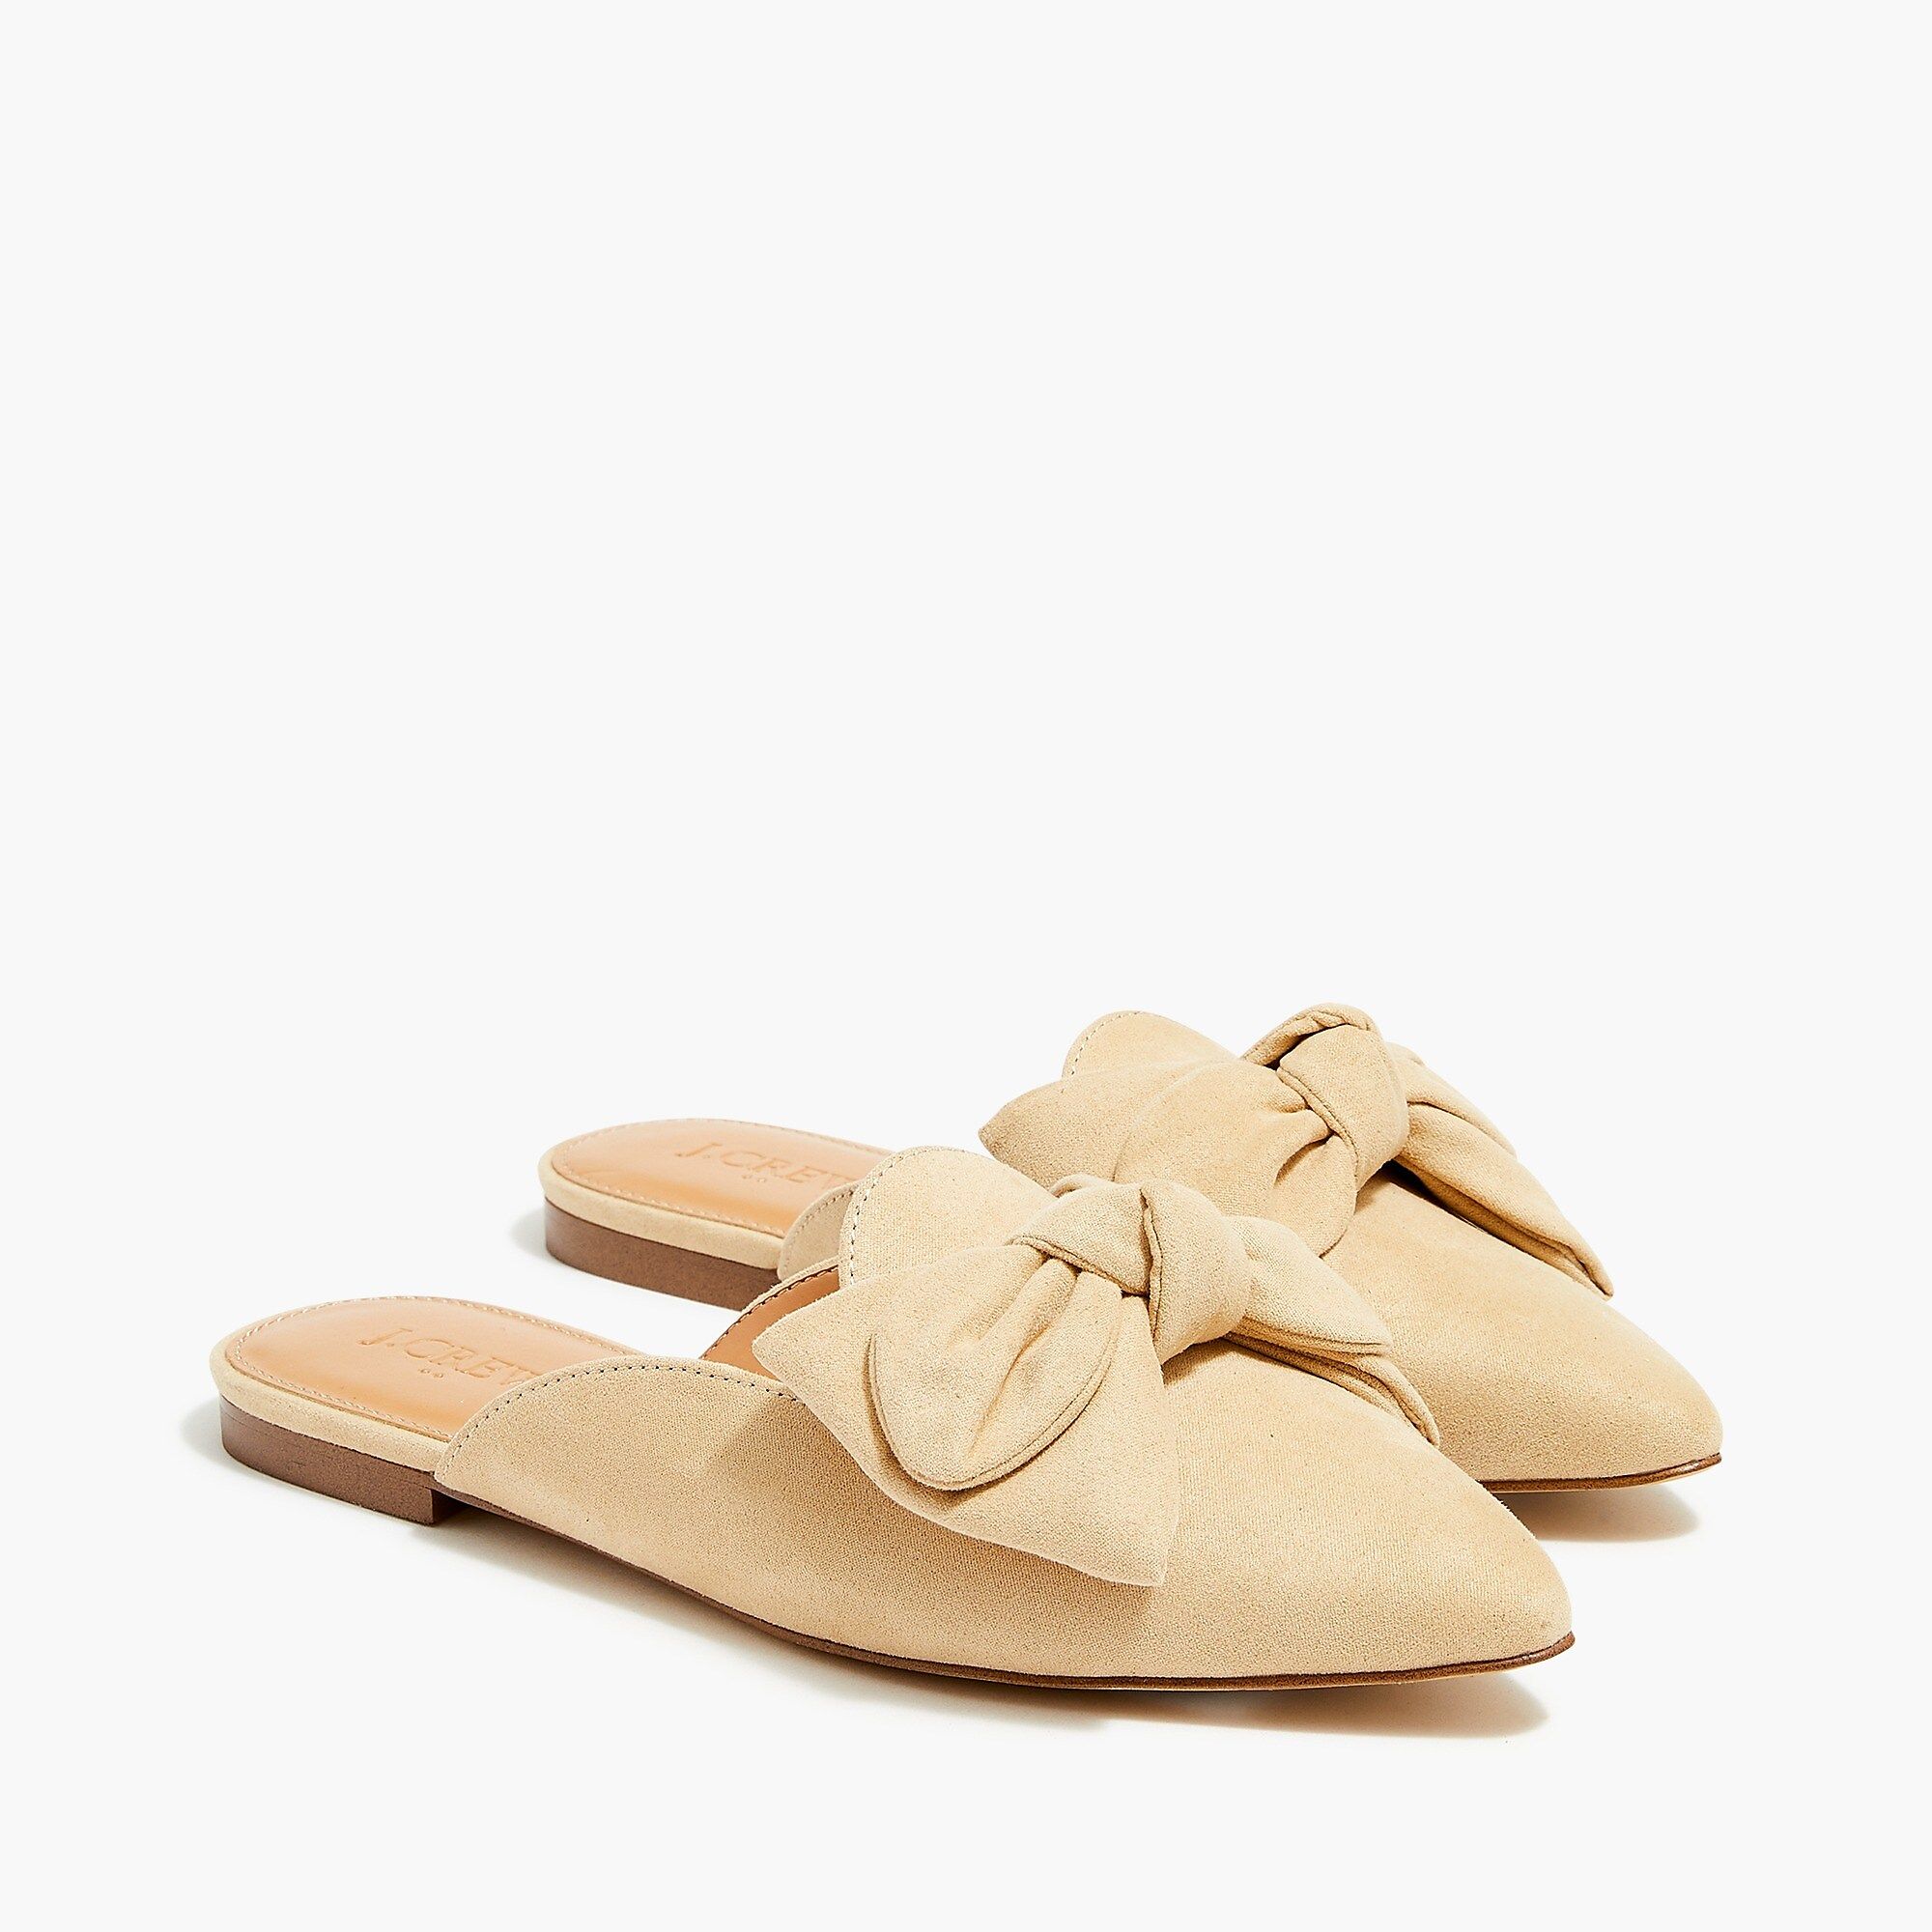 Back To School Outfits Flats Shoes For Classroom | J.Crew Factory